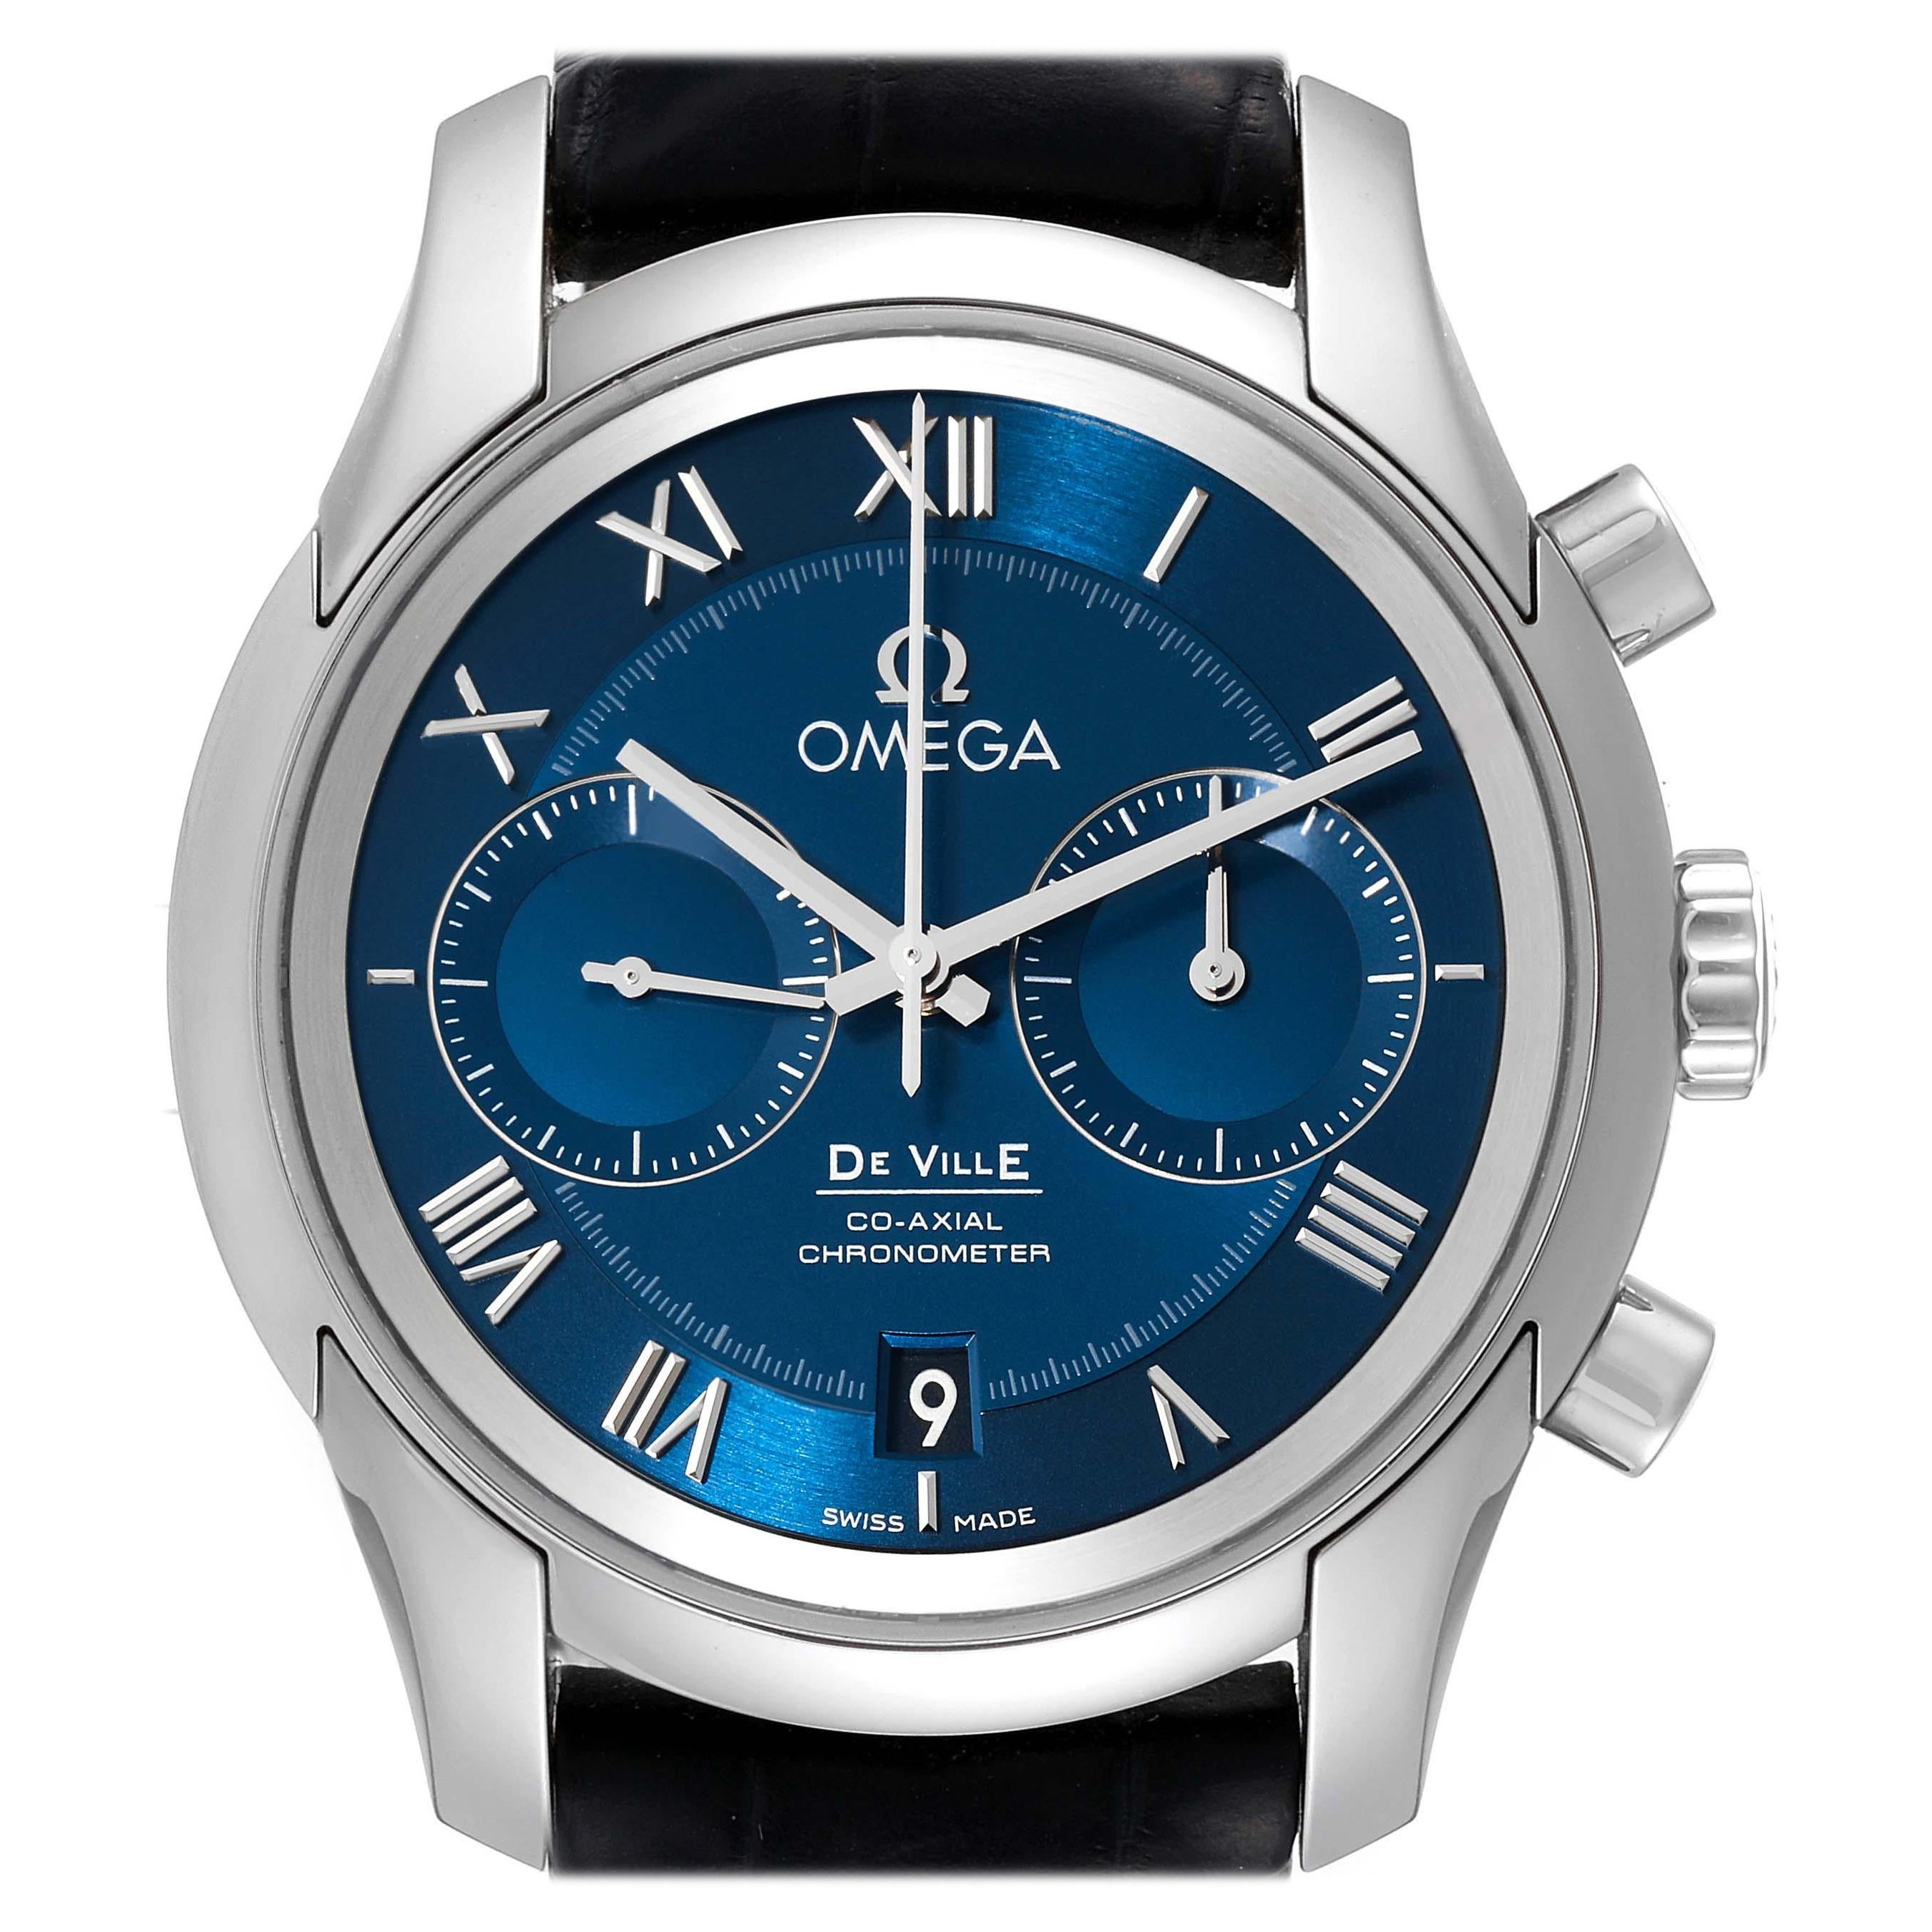 Omega DeVille 42 Blue Dial Steel Mens Watch 431.13.42.51.03.001 Box Card For Sale